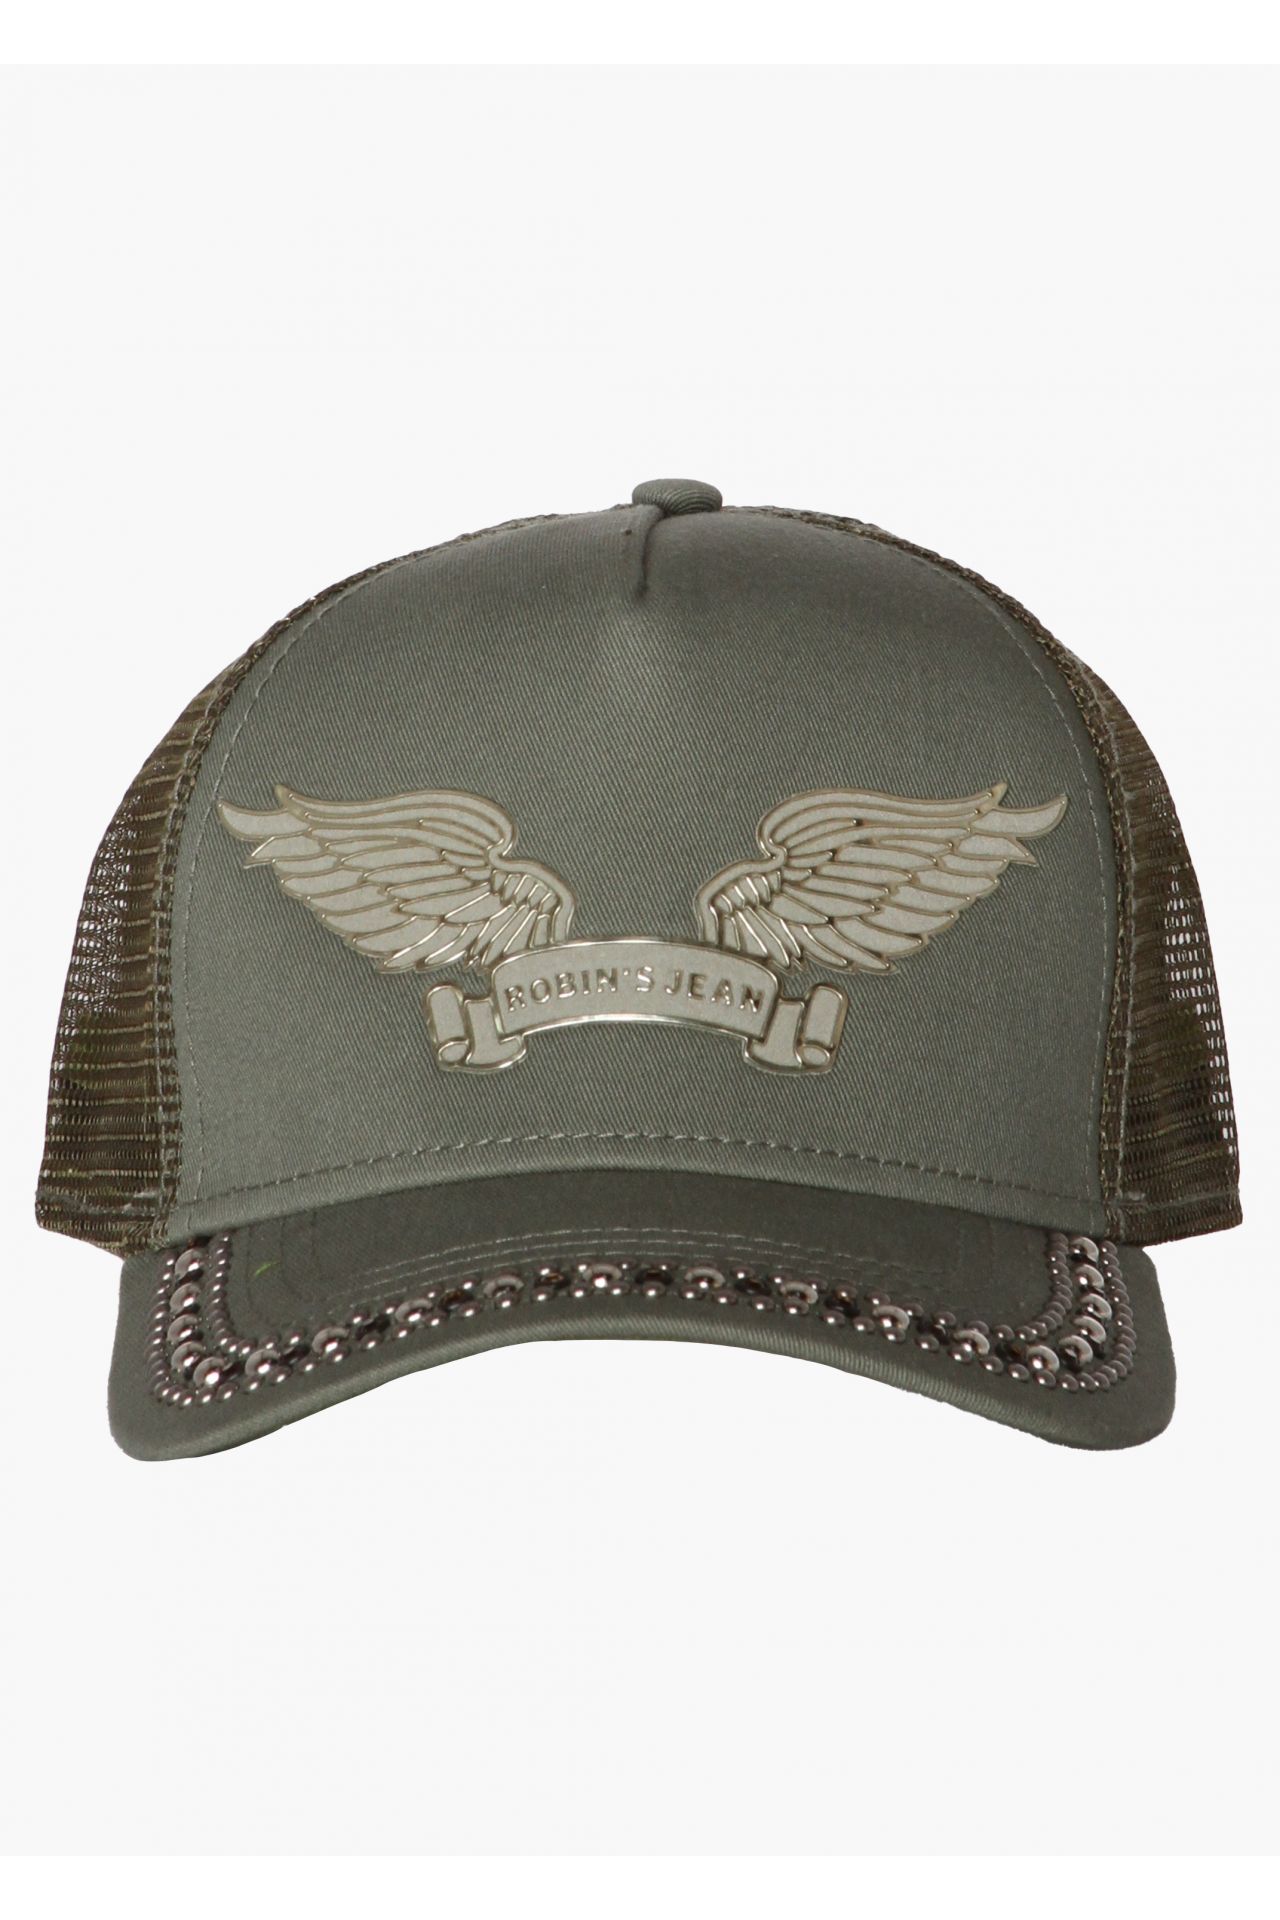 TRUCKER CAP IN OLIVE WITH CRYSTALS